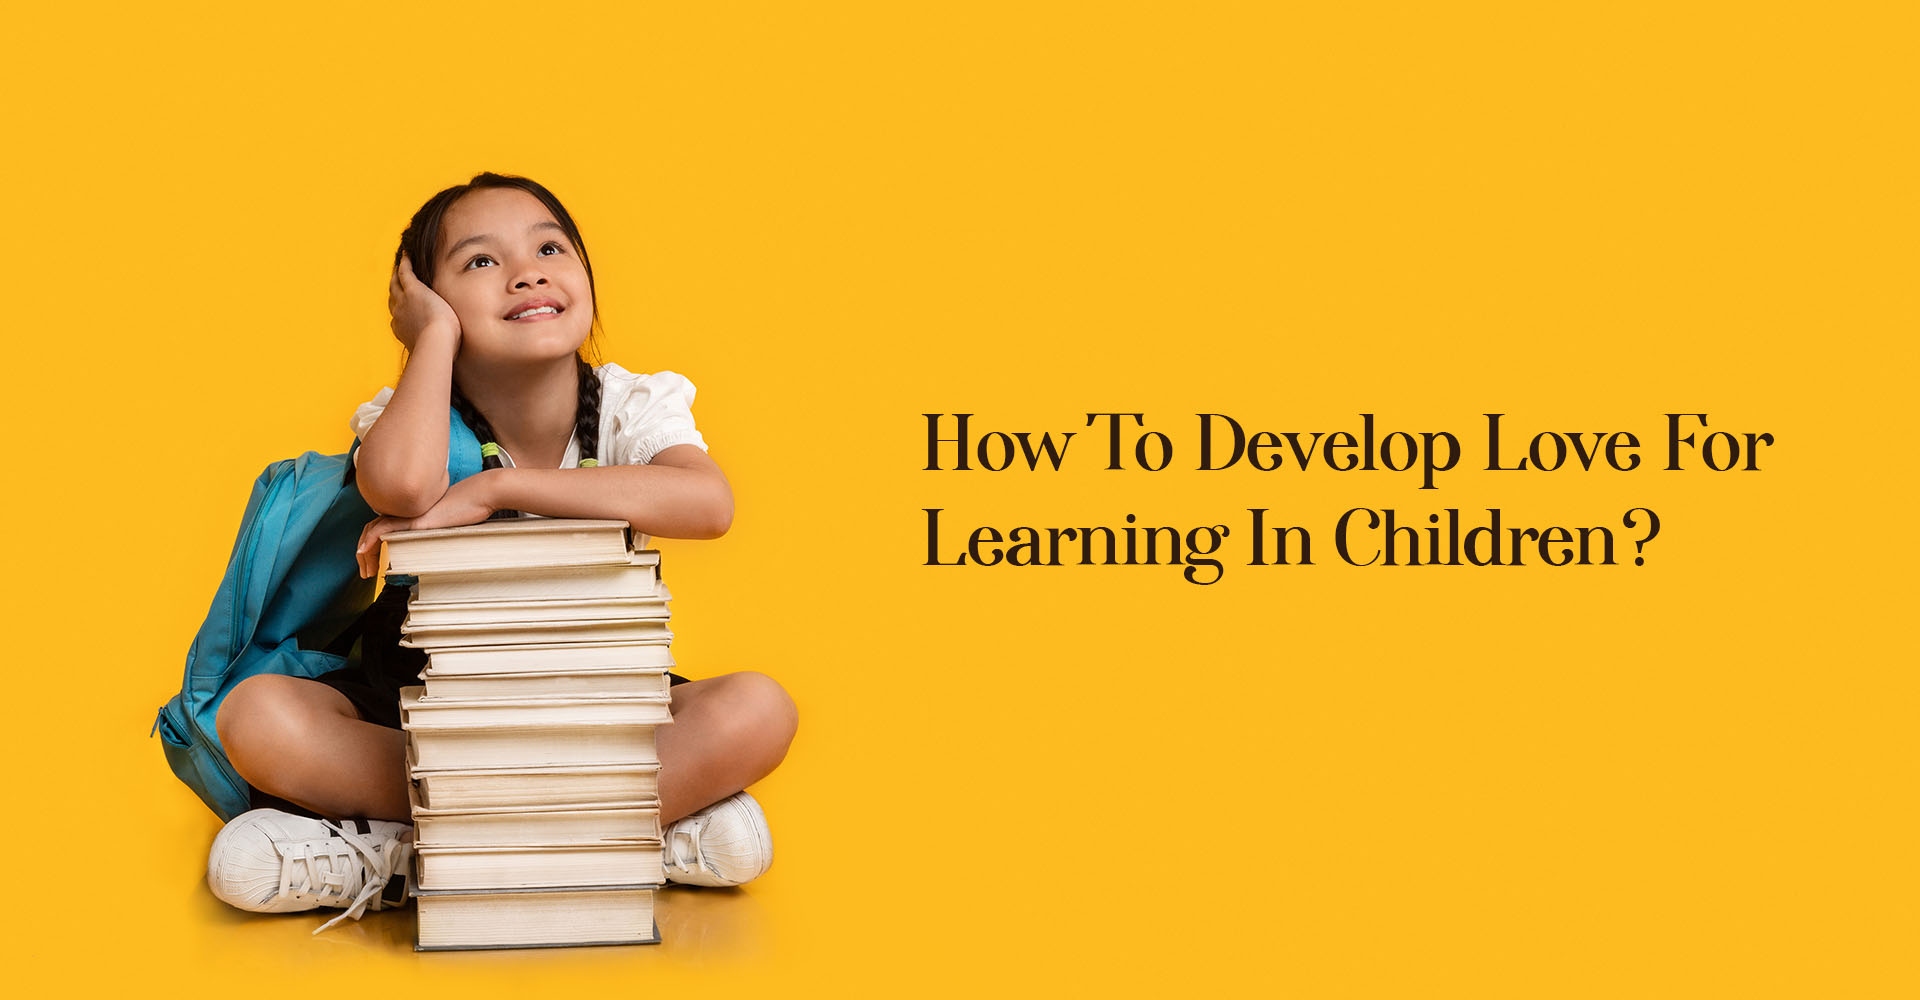 How To Develop Love For Learning In Children